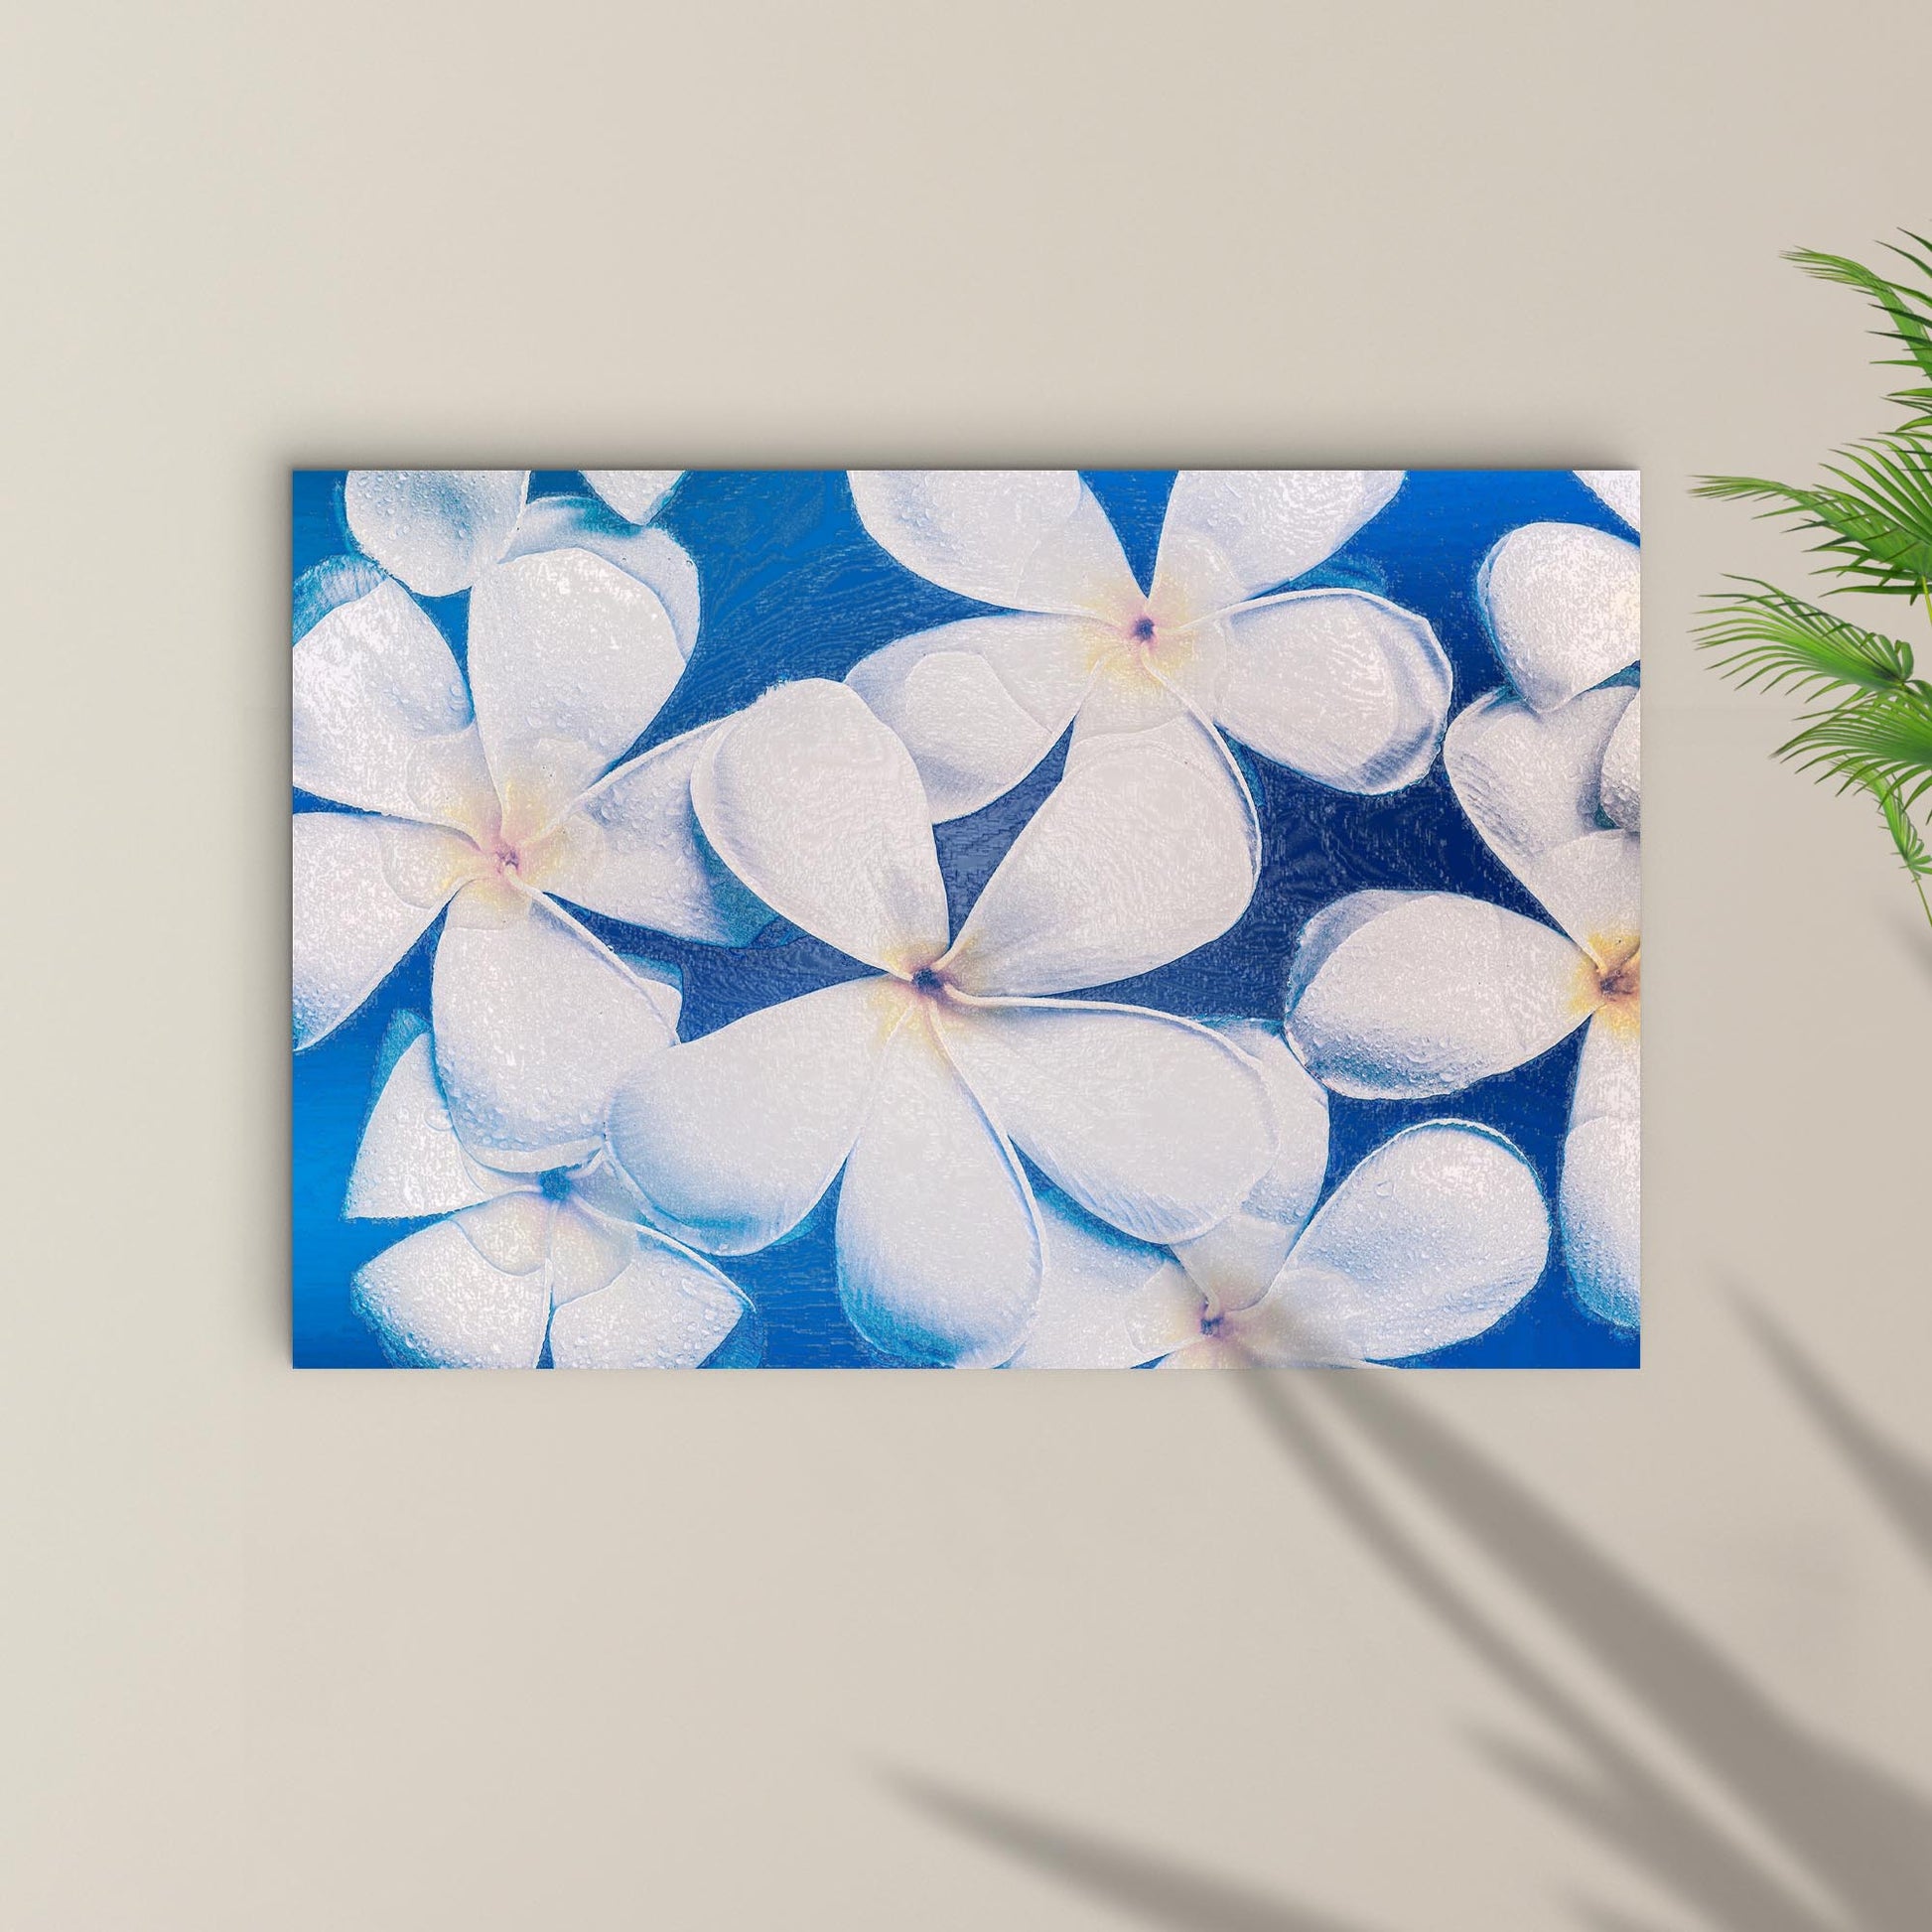 Bright White Frangipani Canvas Wall Art - Image by Tailored Canvases